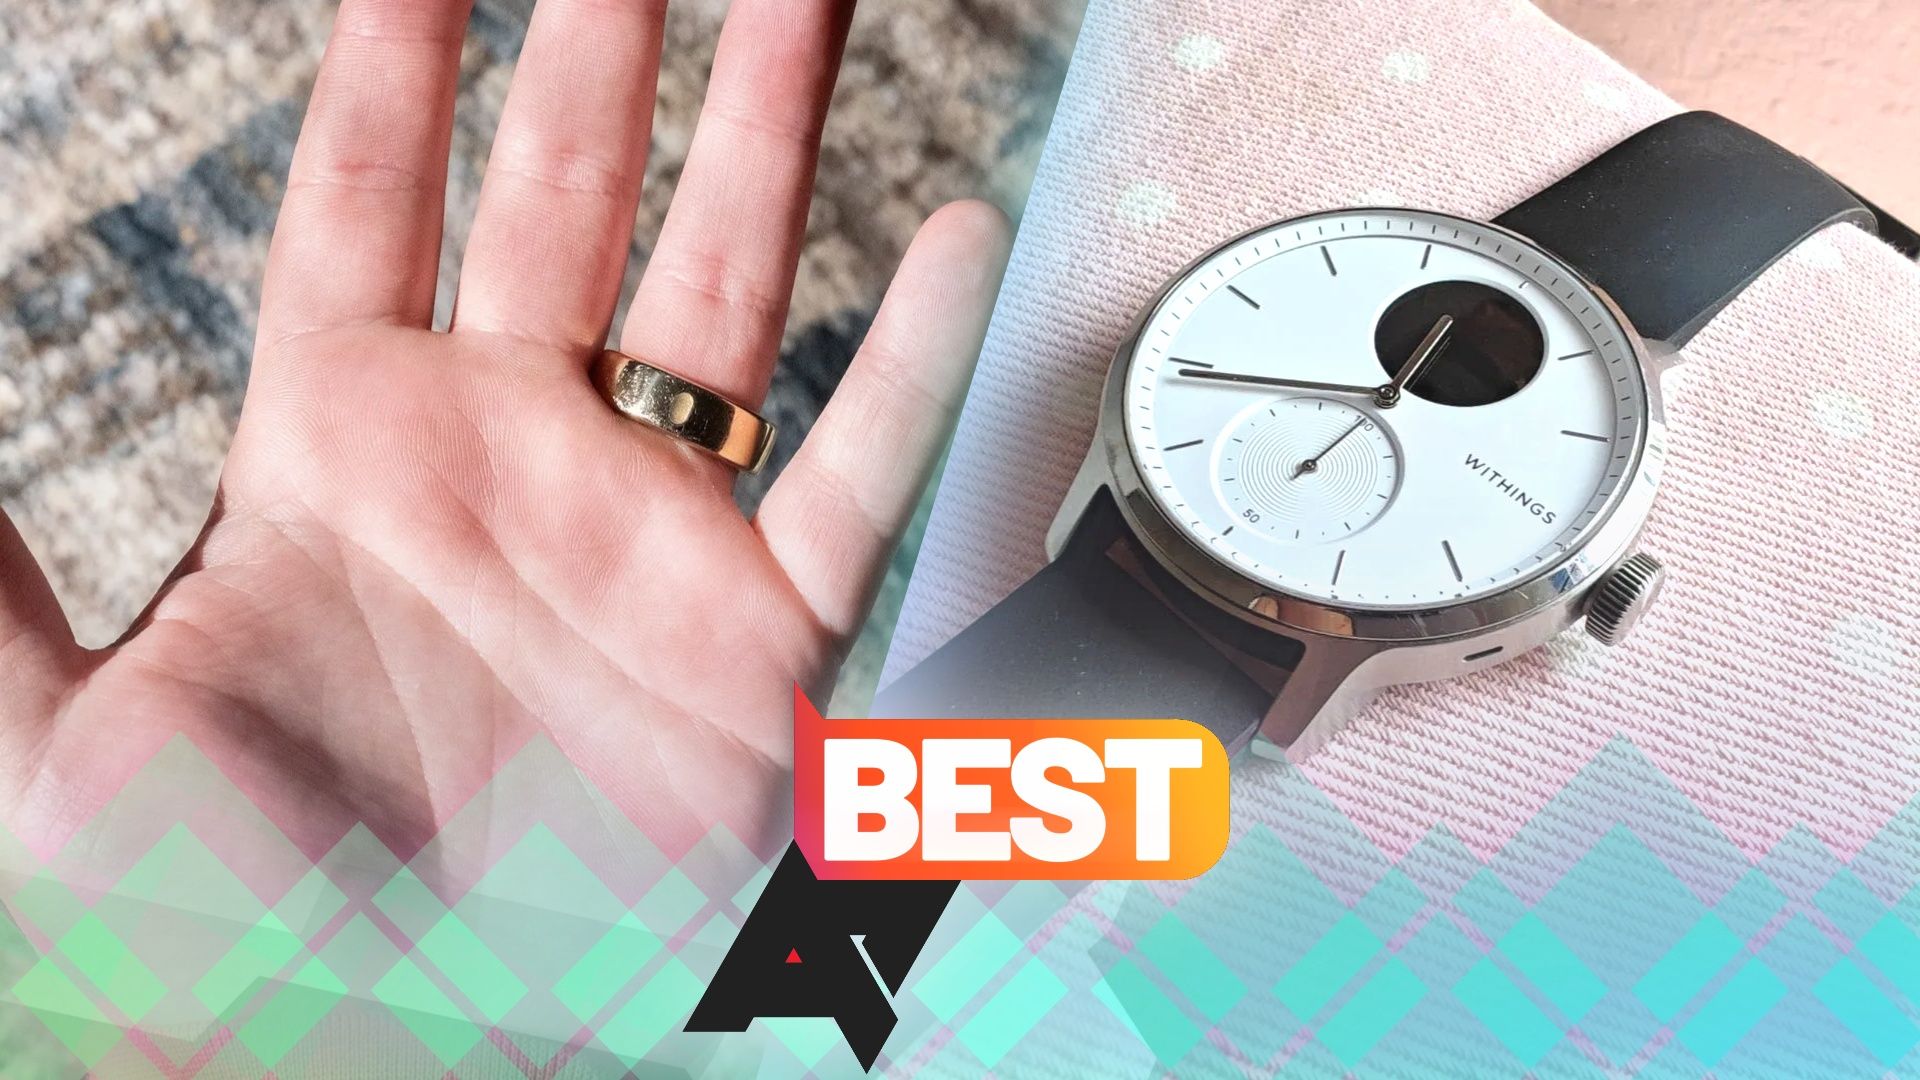 Photos of a smart ring and a Withings watch with an 'AP Best' logo on top